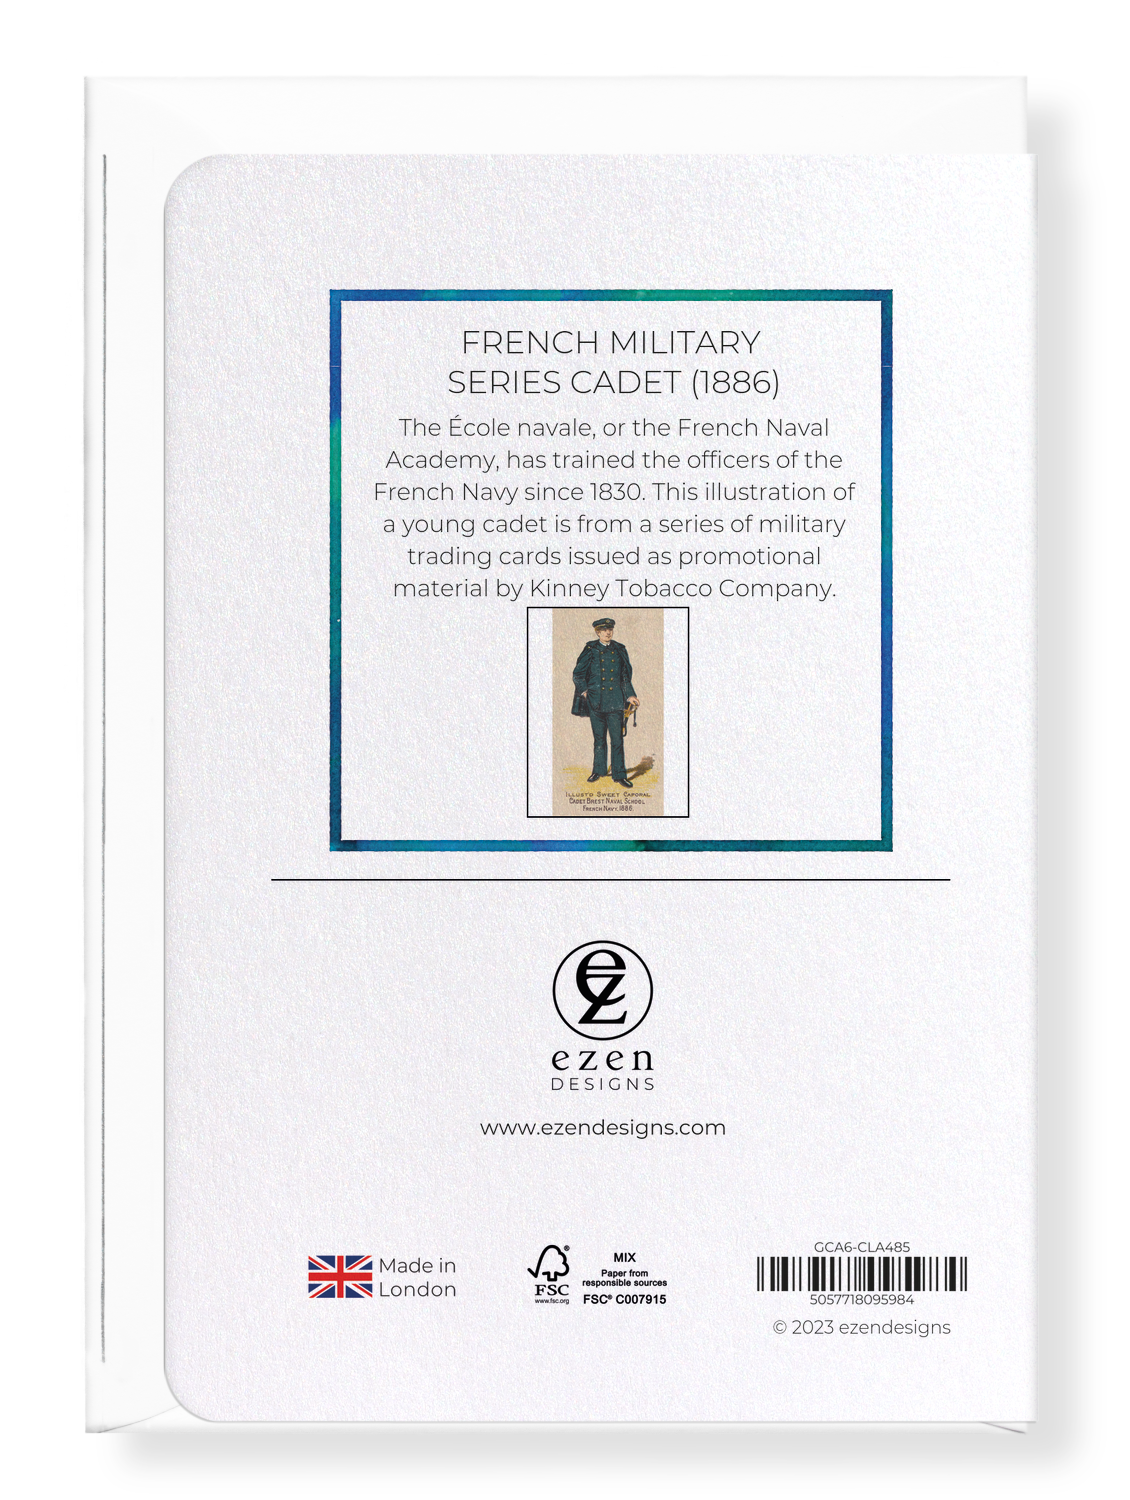 Ezen Designs - French Military Series Cadet (1886) - Greeting Card - Back